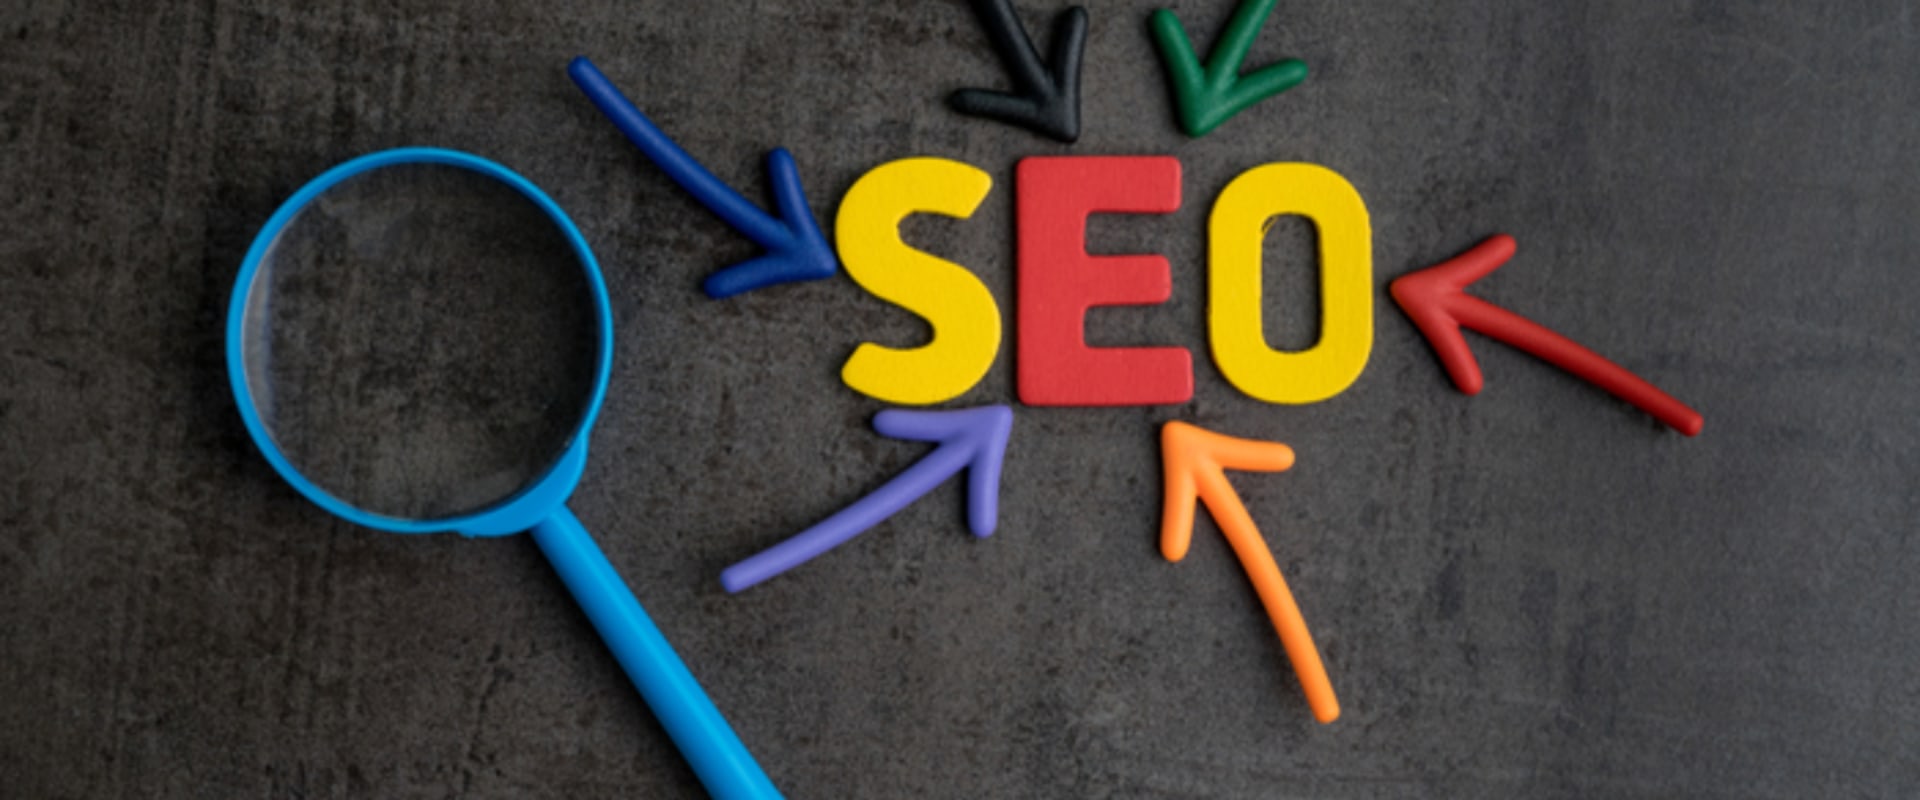 What is seo and why is it so important?